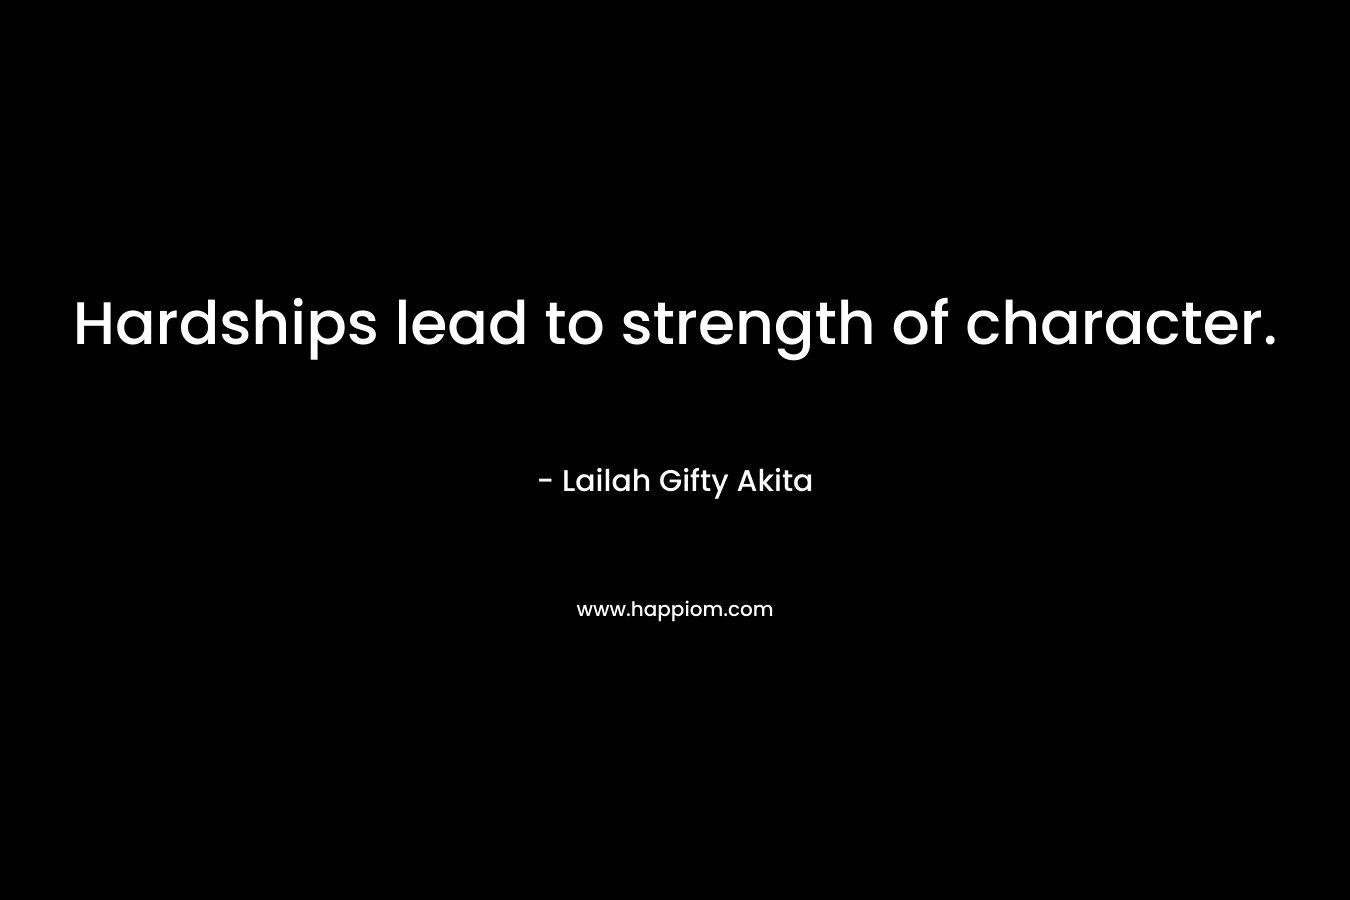 Hardships lead to strength of character. – Lailah Gifty Akita